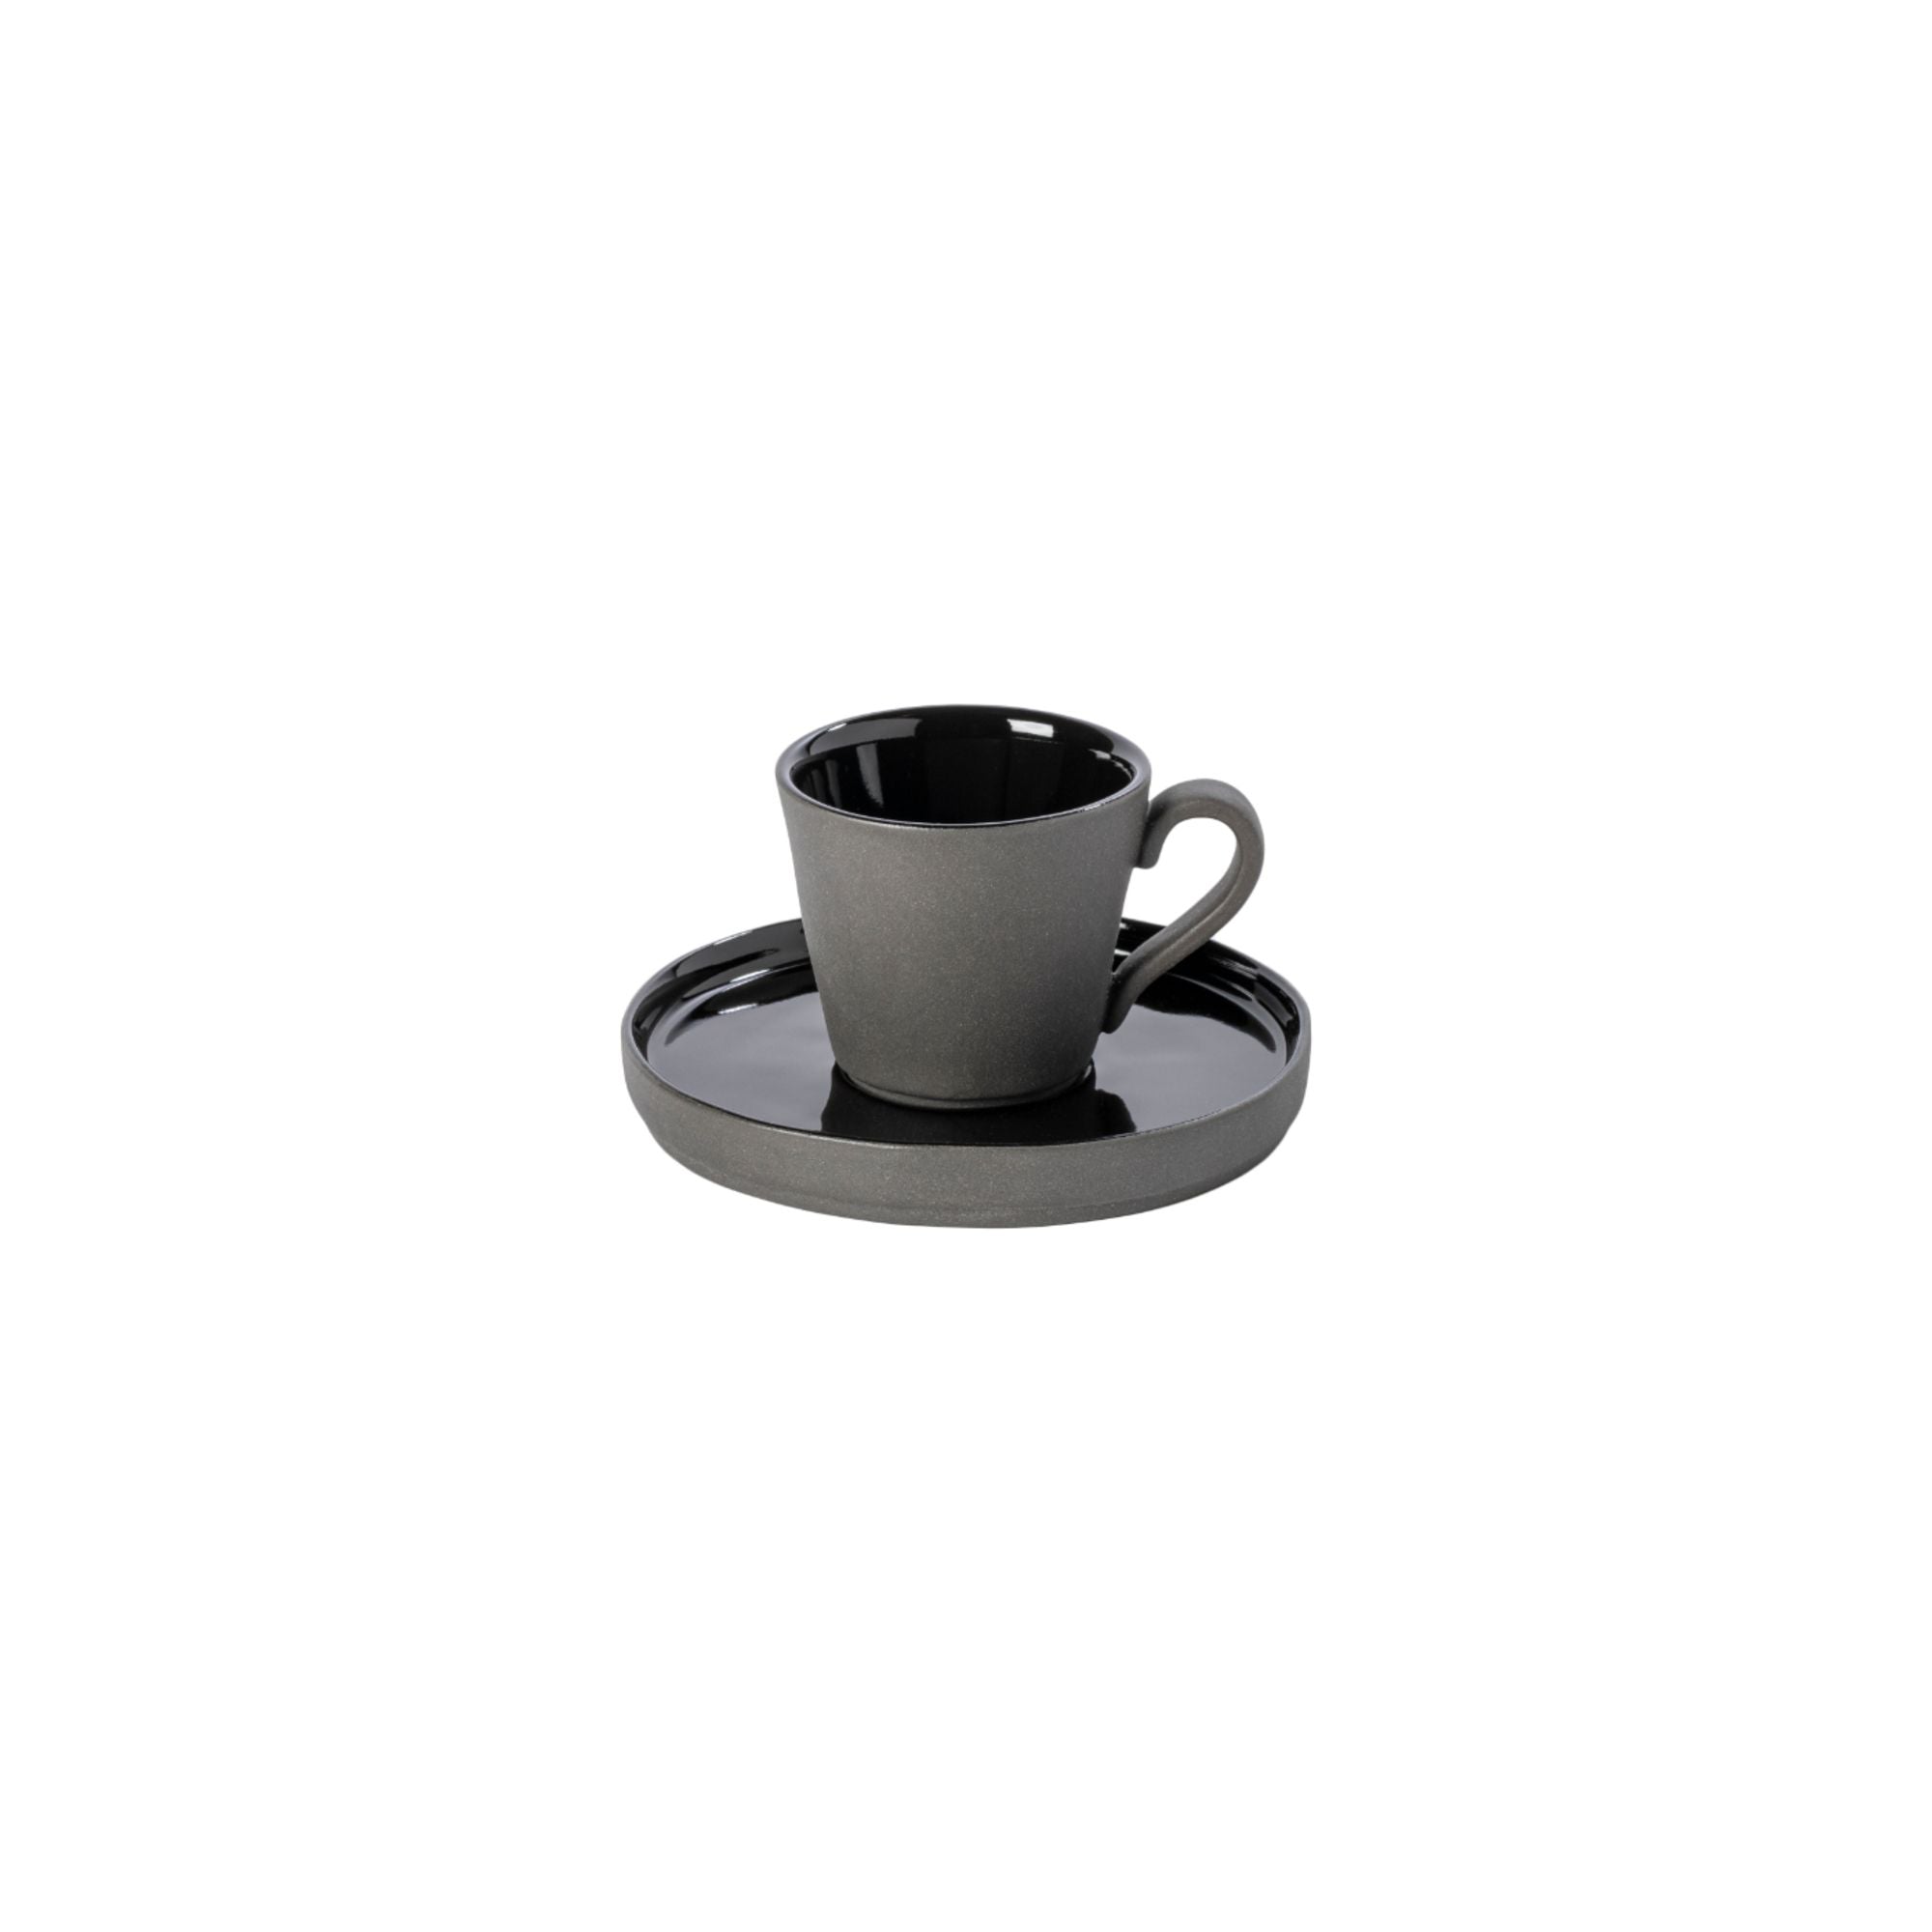 Lagoa Eco Gres Coffee Cup and Saucer 3 oz. Black